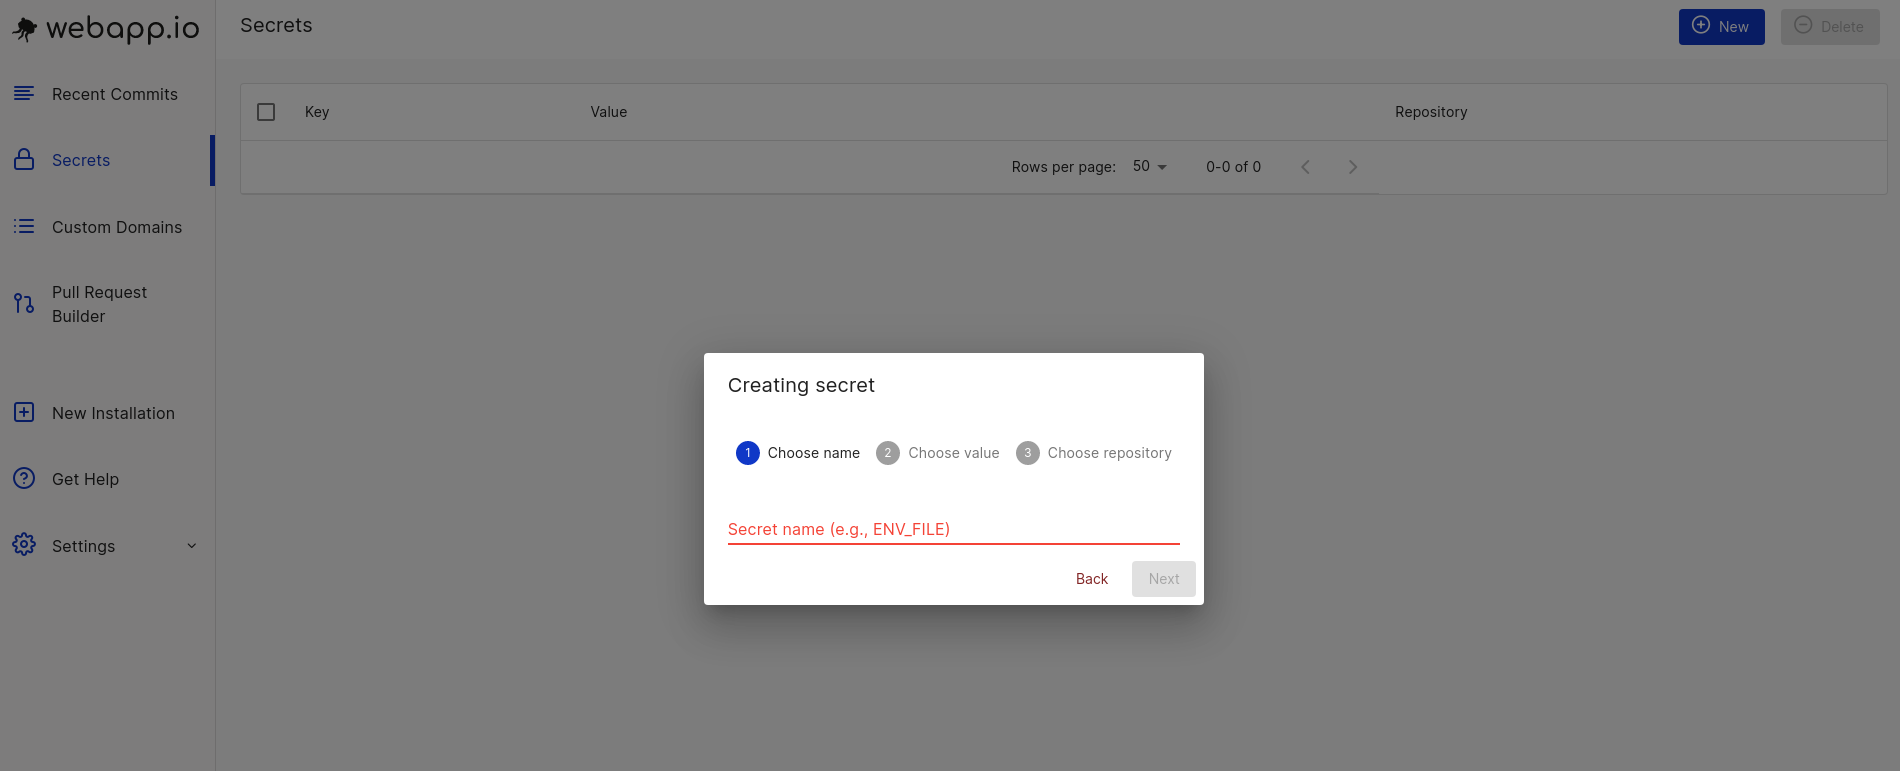 View of dialogue box prompting secret creation in webapp.io